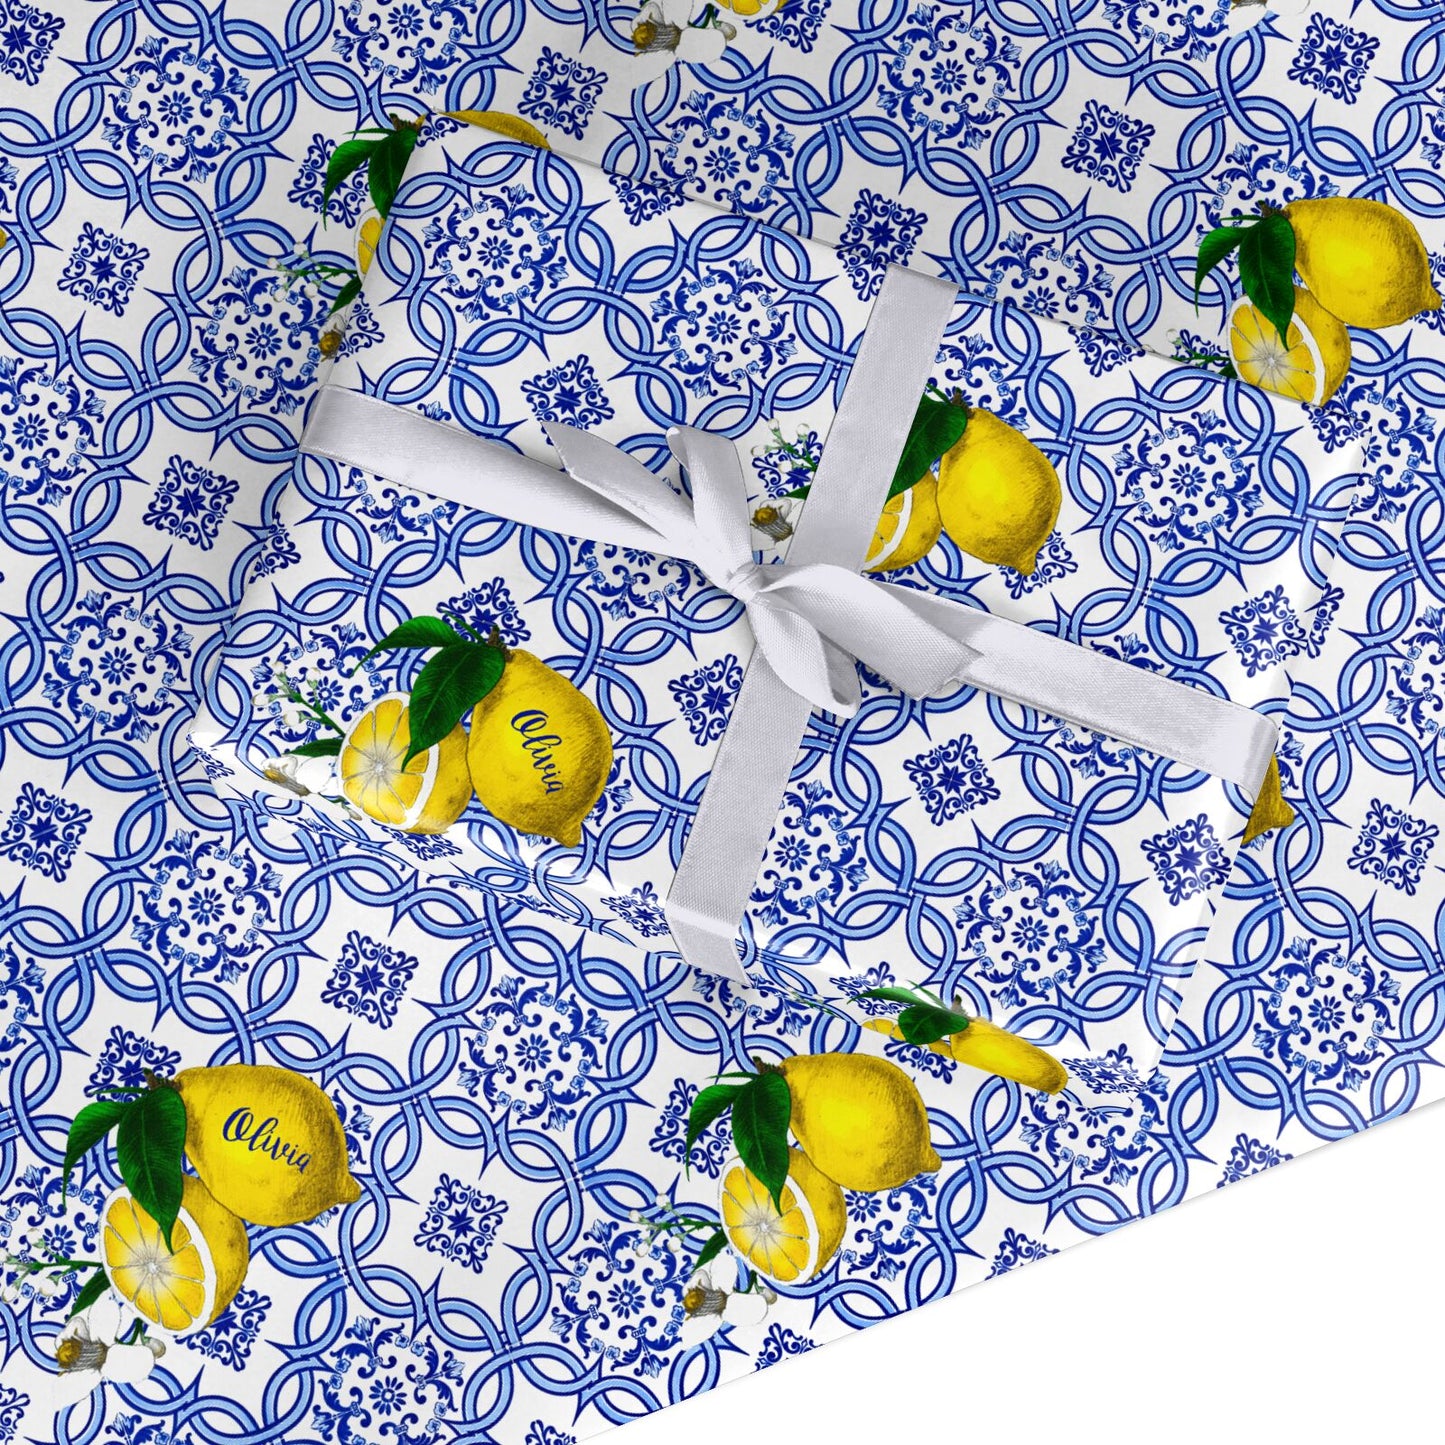 ECOARTTE Lemons and Moroccan Tile Wrapping Paper Set Includes: 6 Reversible Sheets 28”x20”, 6 Adhesive Gift Tags and 3 Yards of Ribbon. The Paper Is